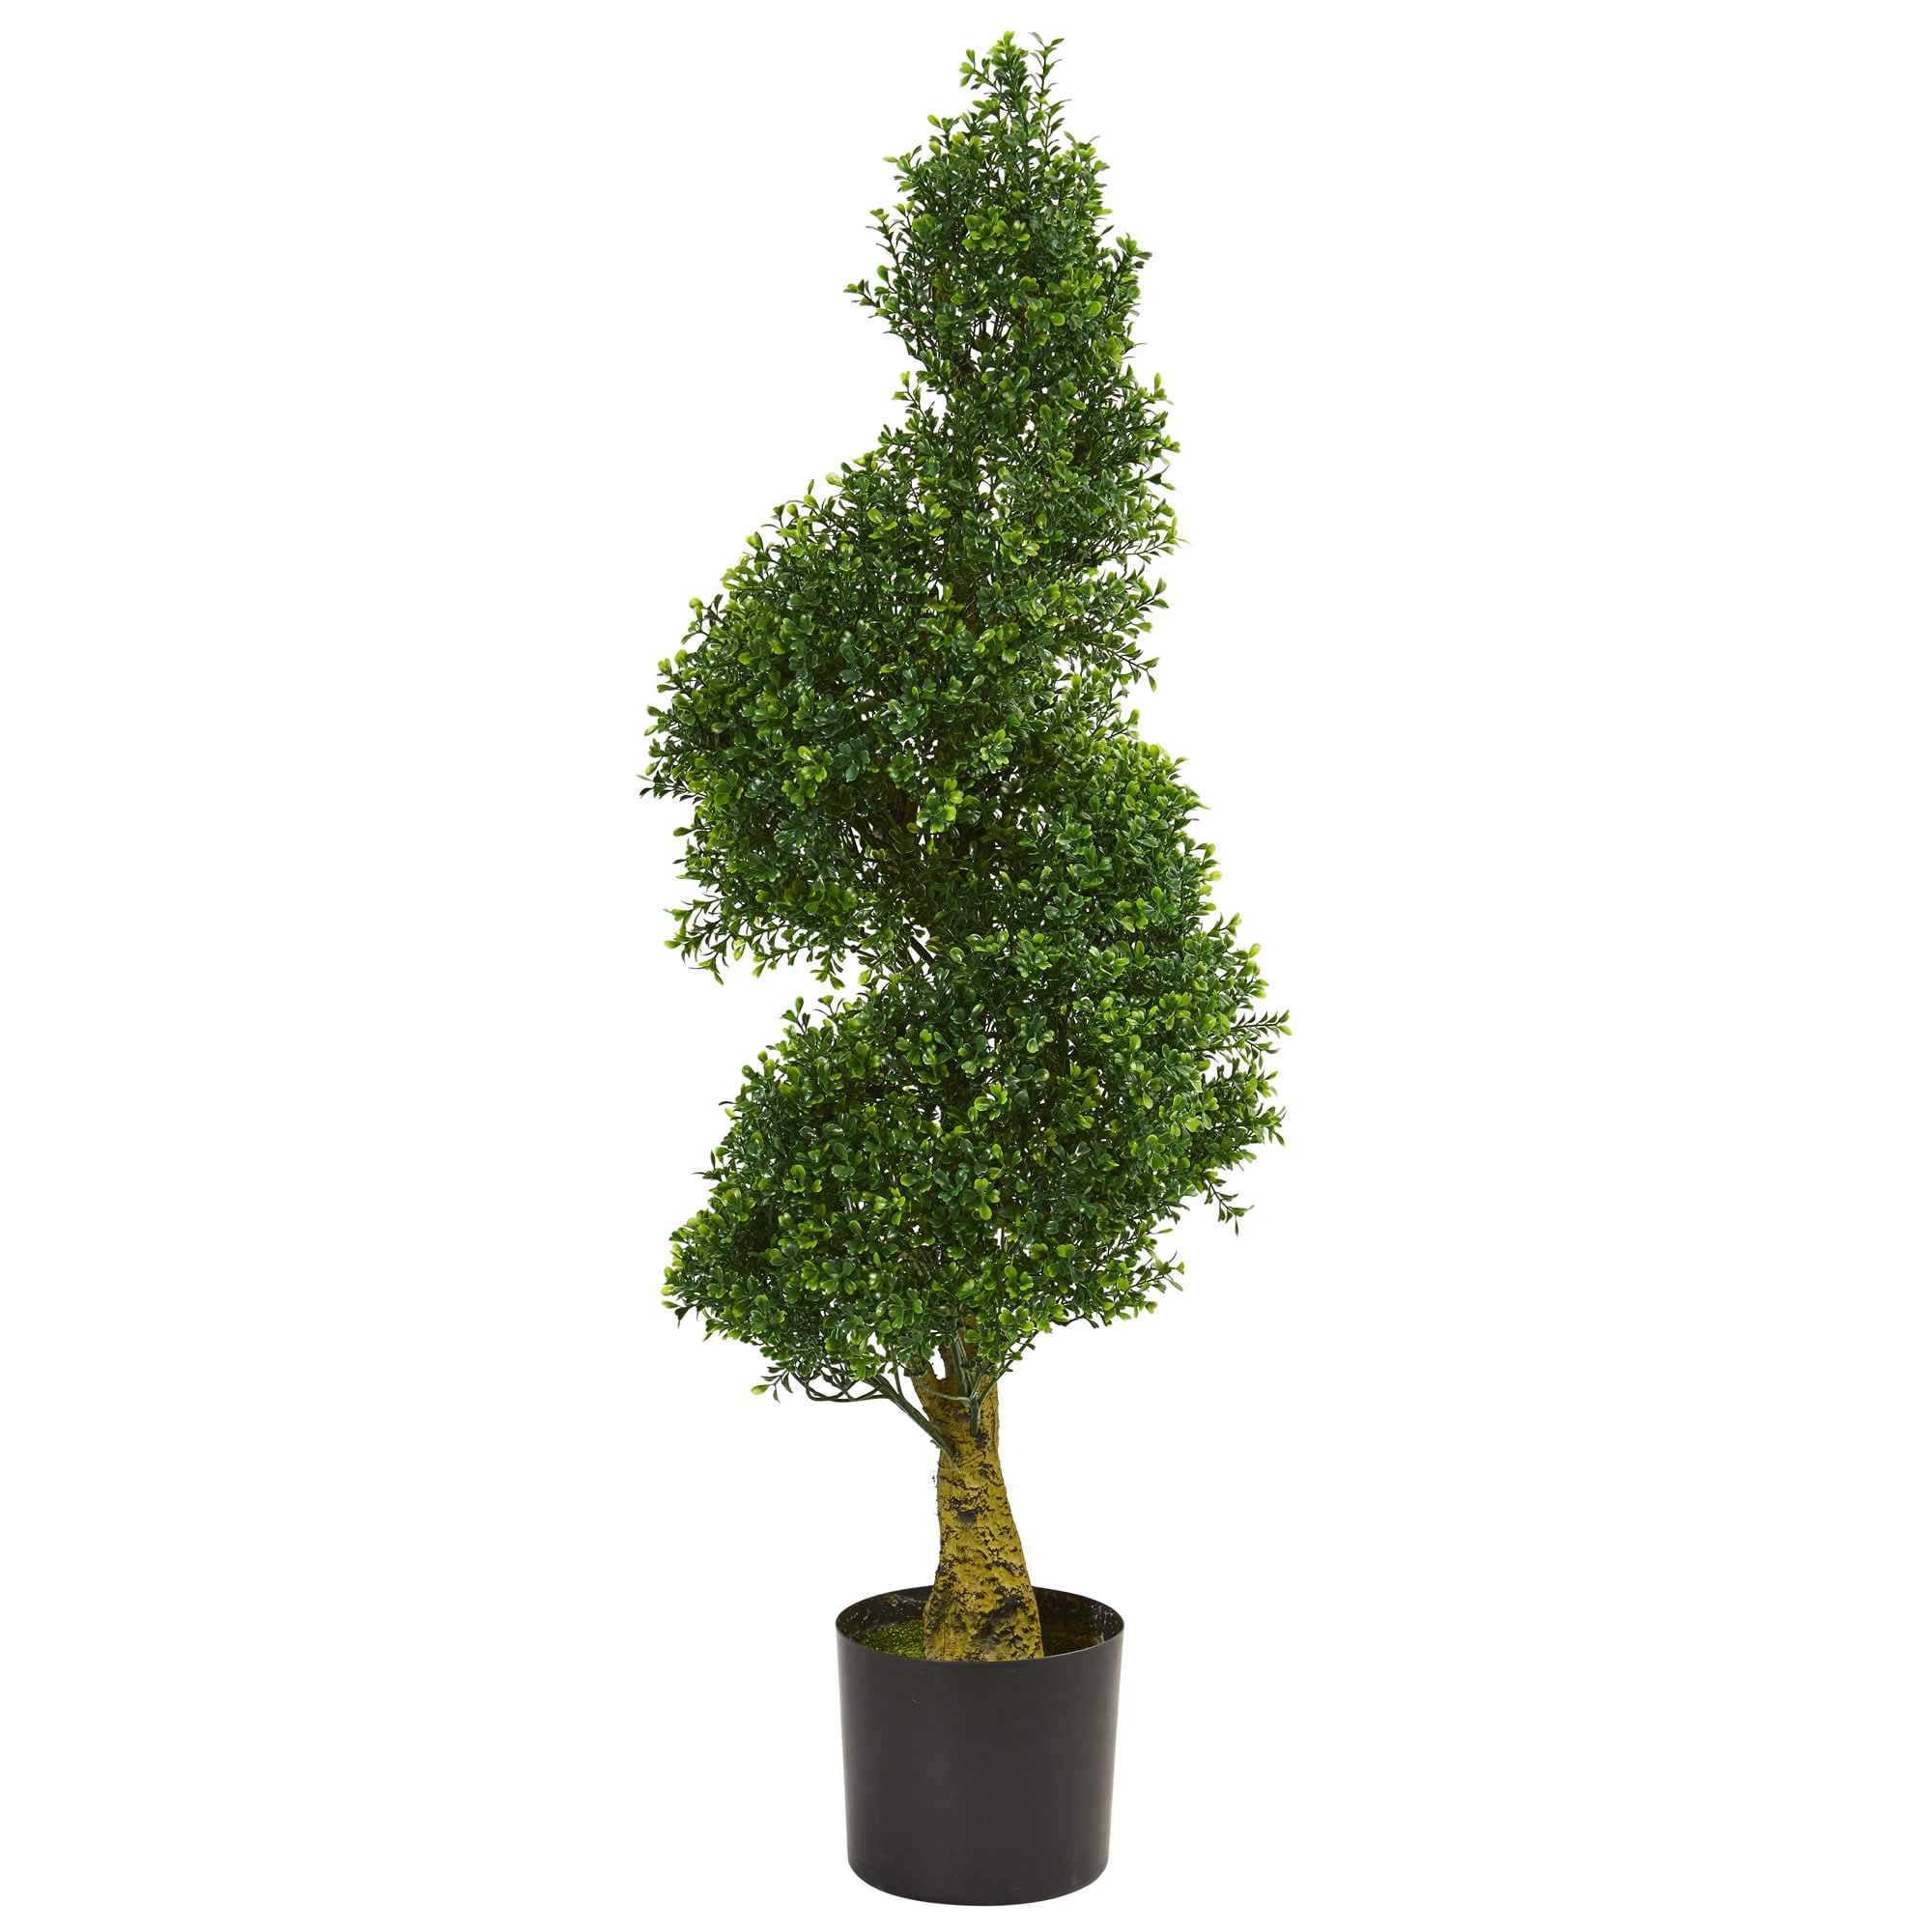 36" ARTIFICIAL WIDE BOXWOOD OUTDOOR TOPIARY TREE PLANT UV SPIRAL 3' POOL PORCH 